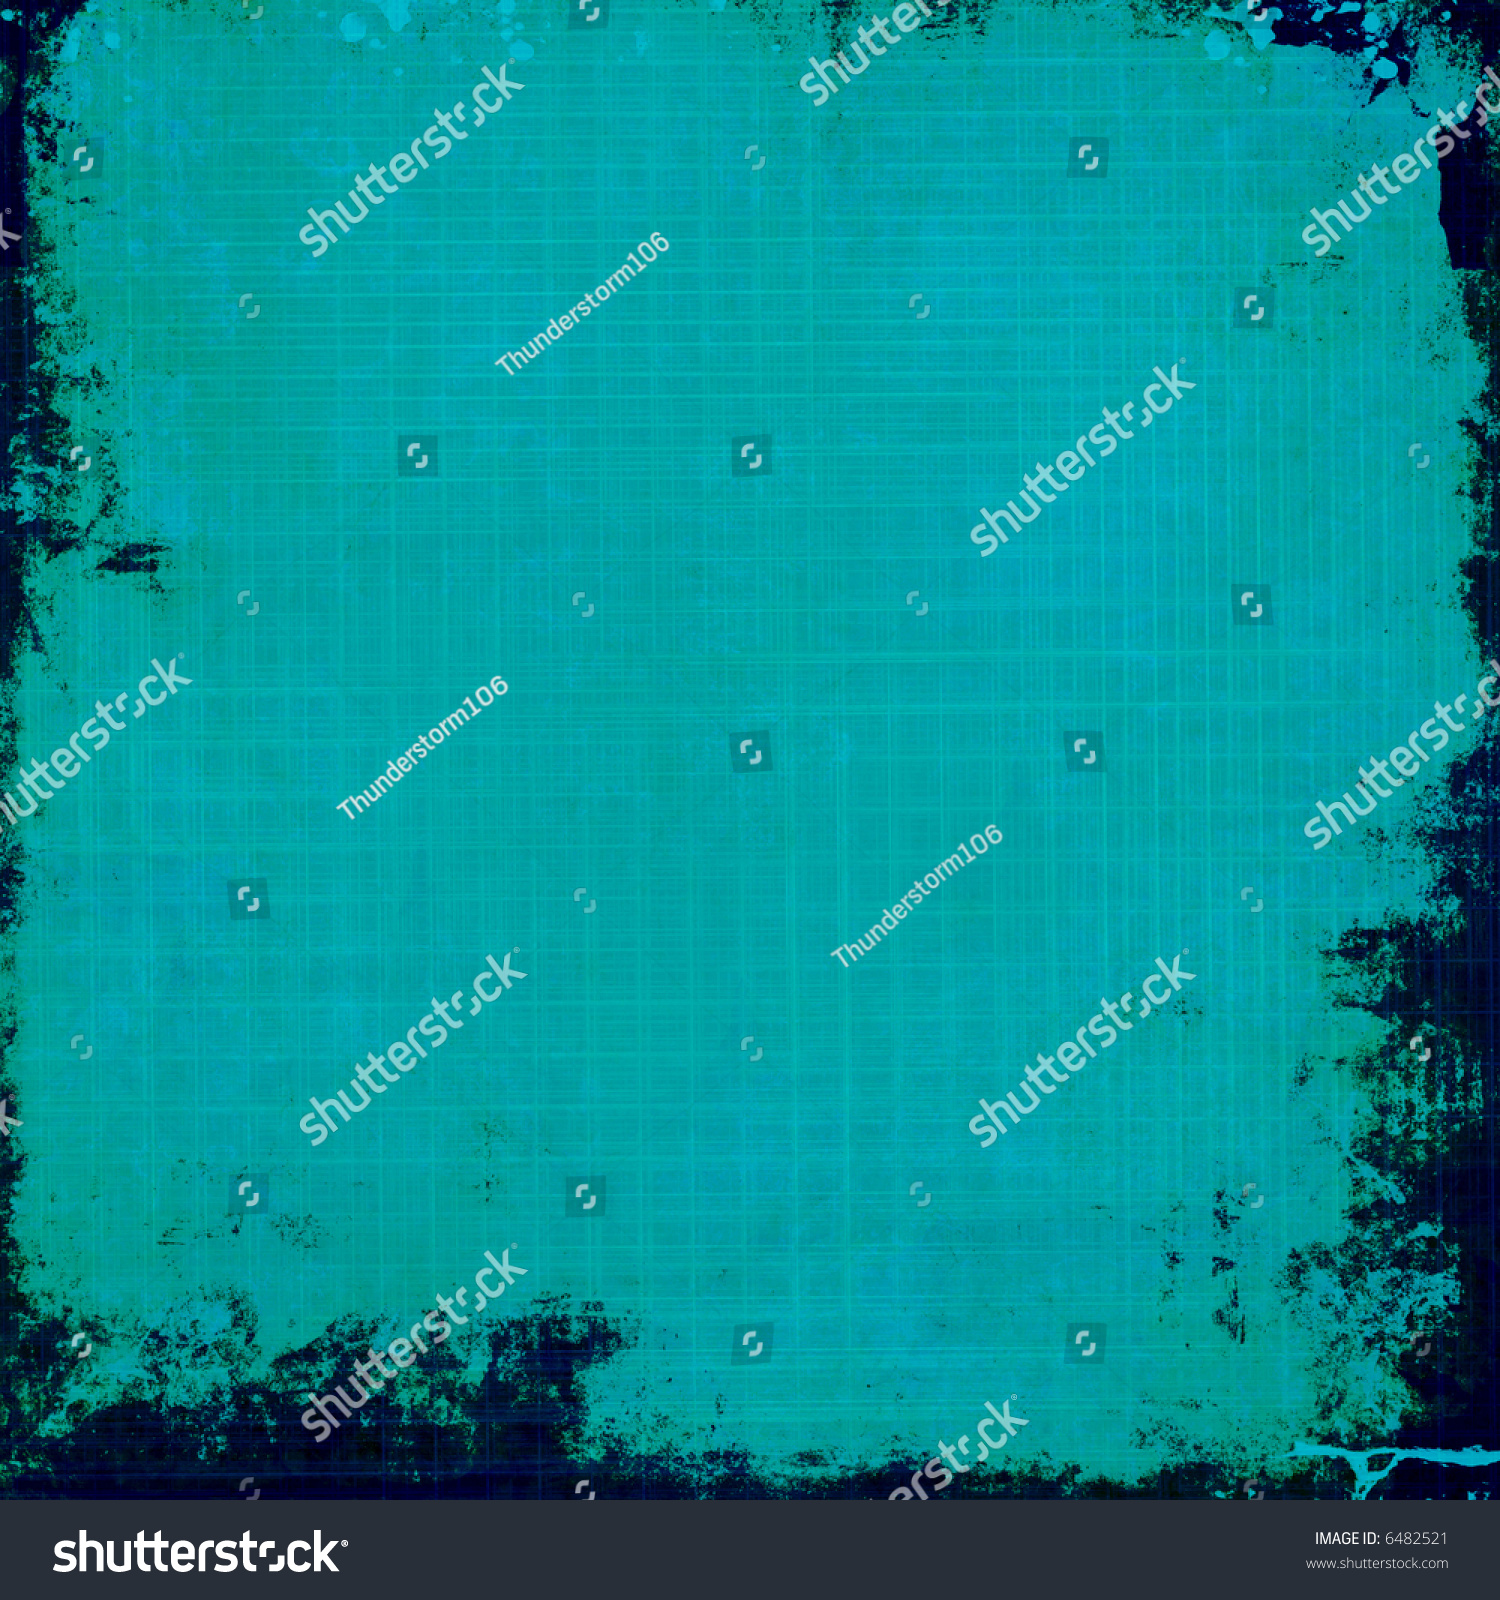 Grunge Teal Background With Edge Overlay Stock Photo 6482521 : Shutterstock